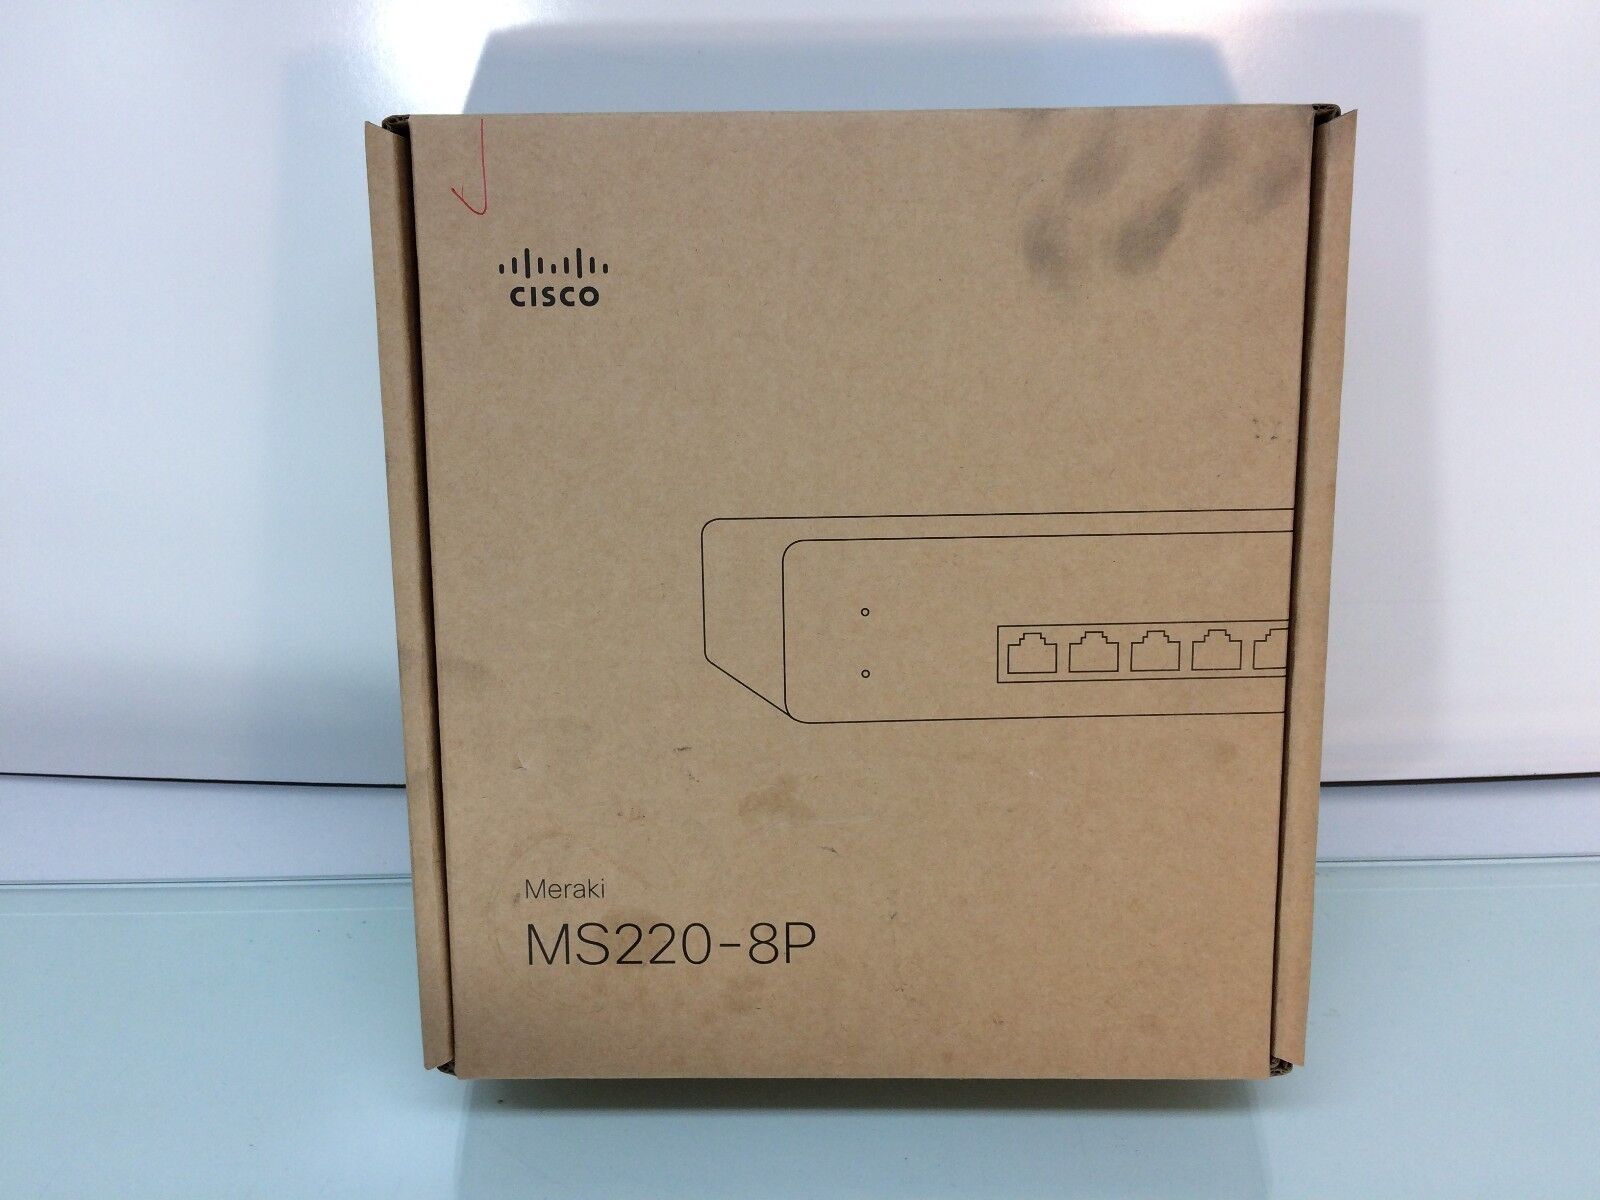 Meraki MS220-8P-HW 8-Port Cloud Managed PoE Switch 3 Yr Ent. Licence Unclaimed!